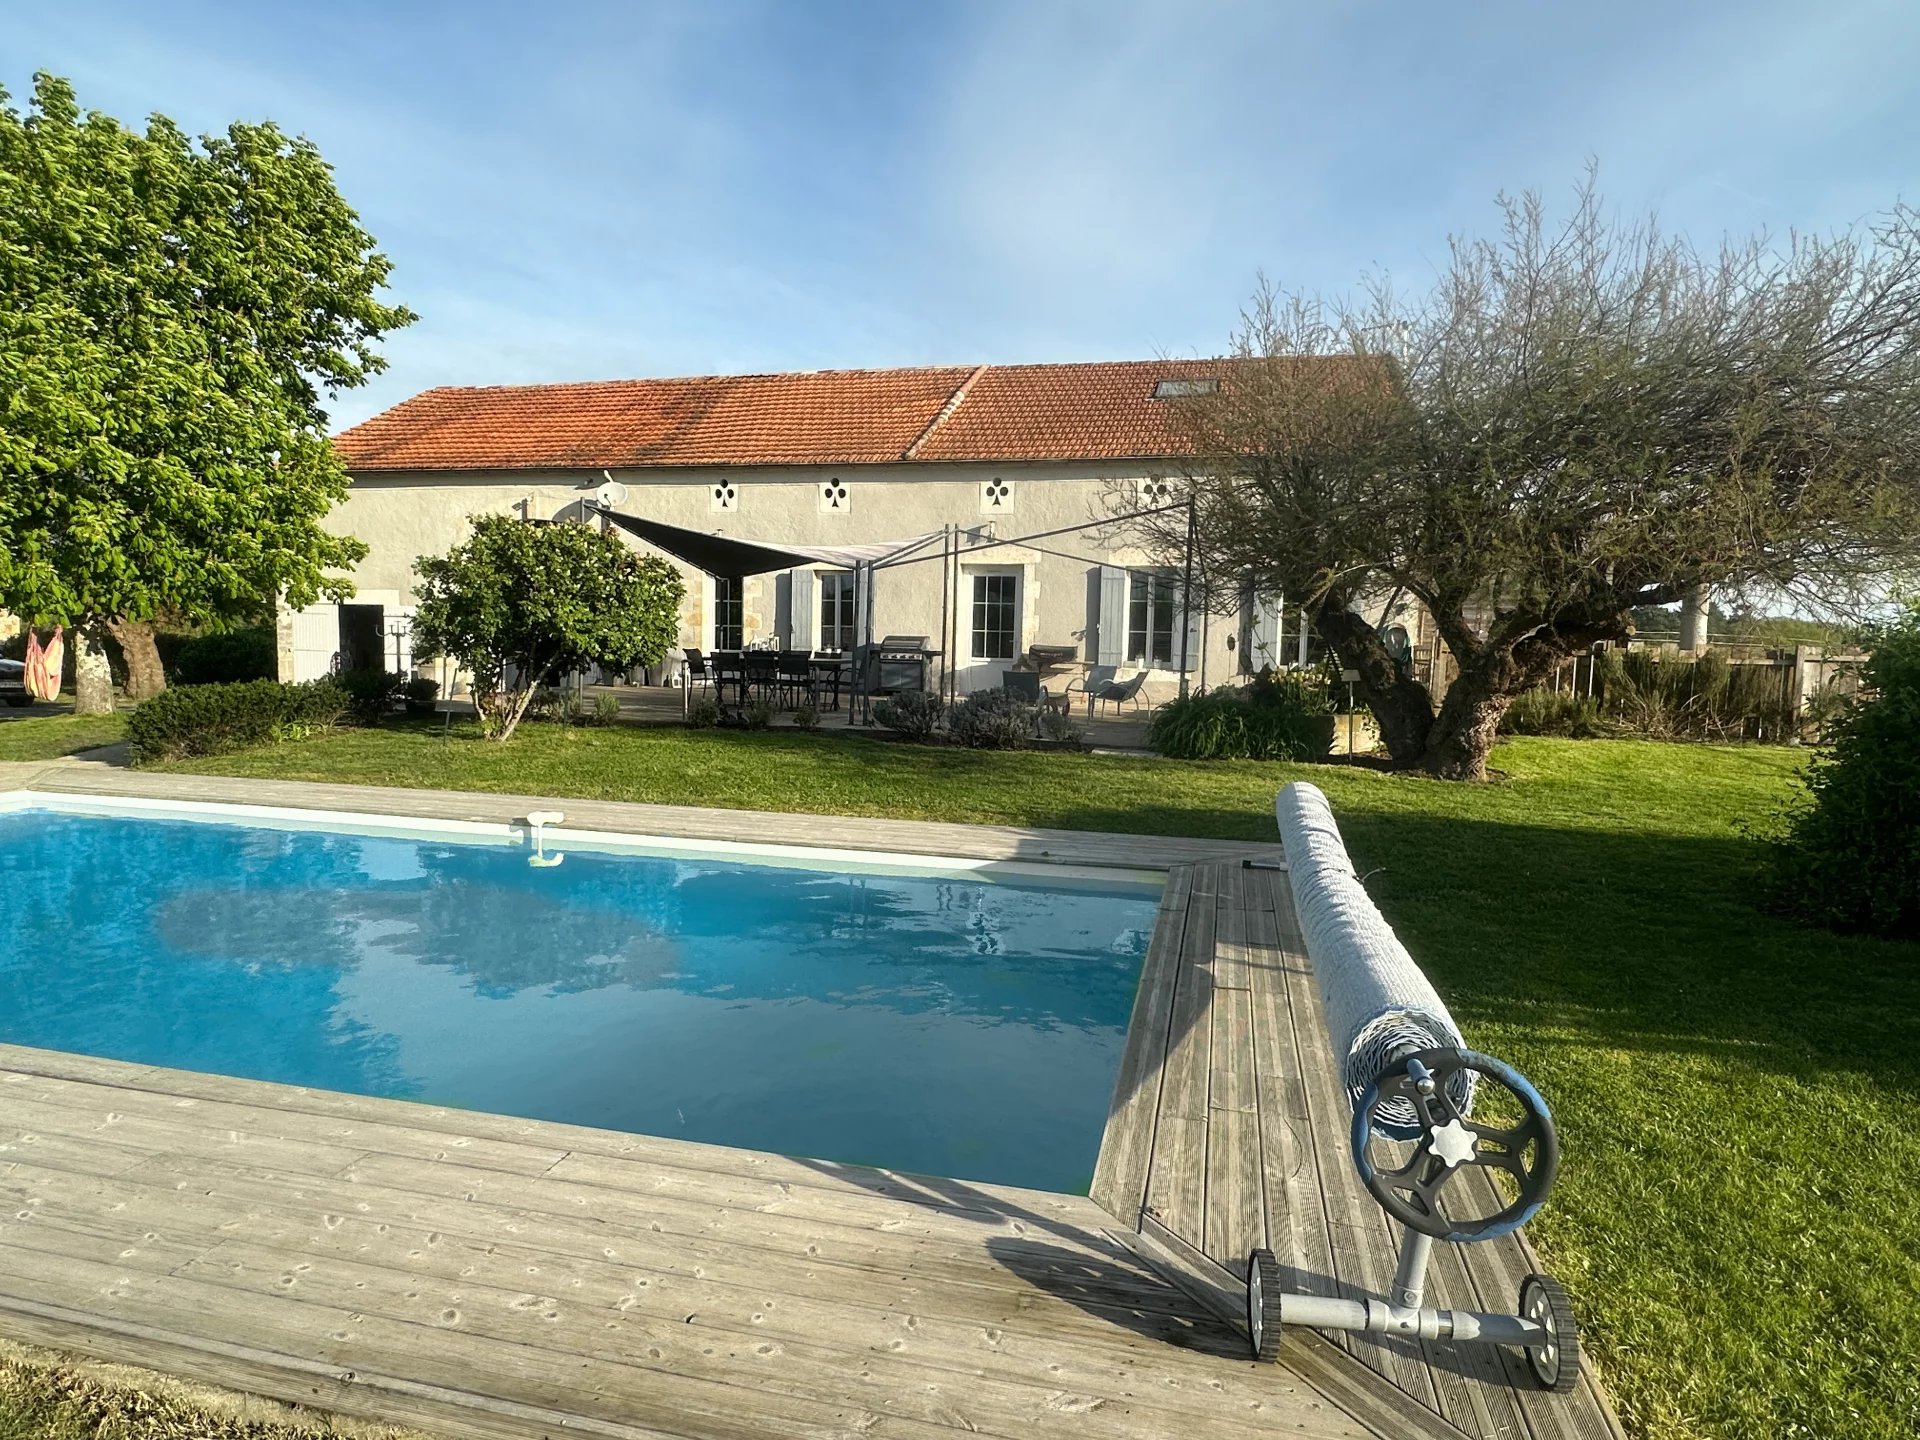 30 minutes from Bergerac and 1 hour from Bordeaux, 160m² country retreat with barn and pool